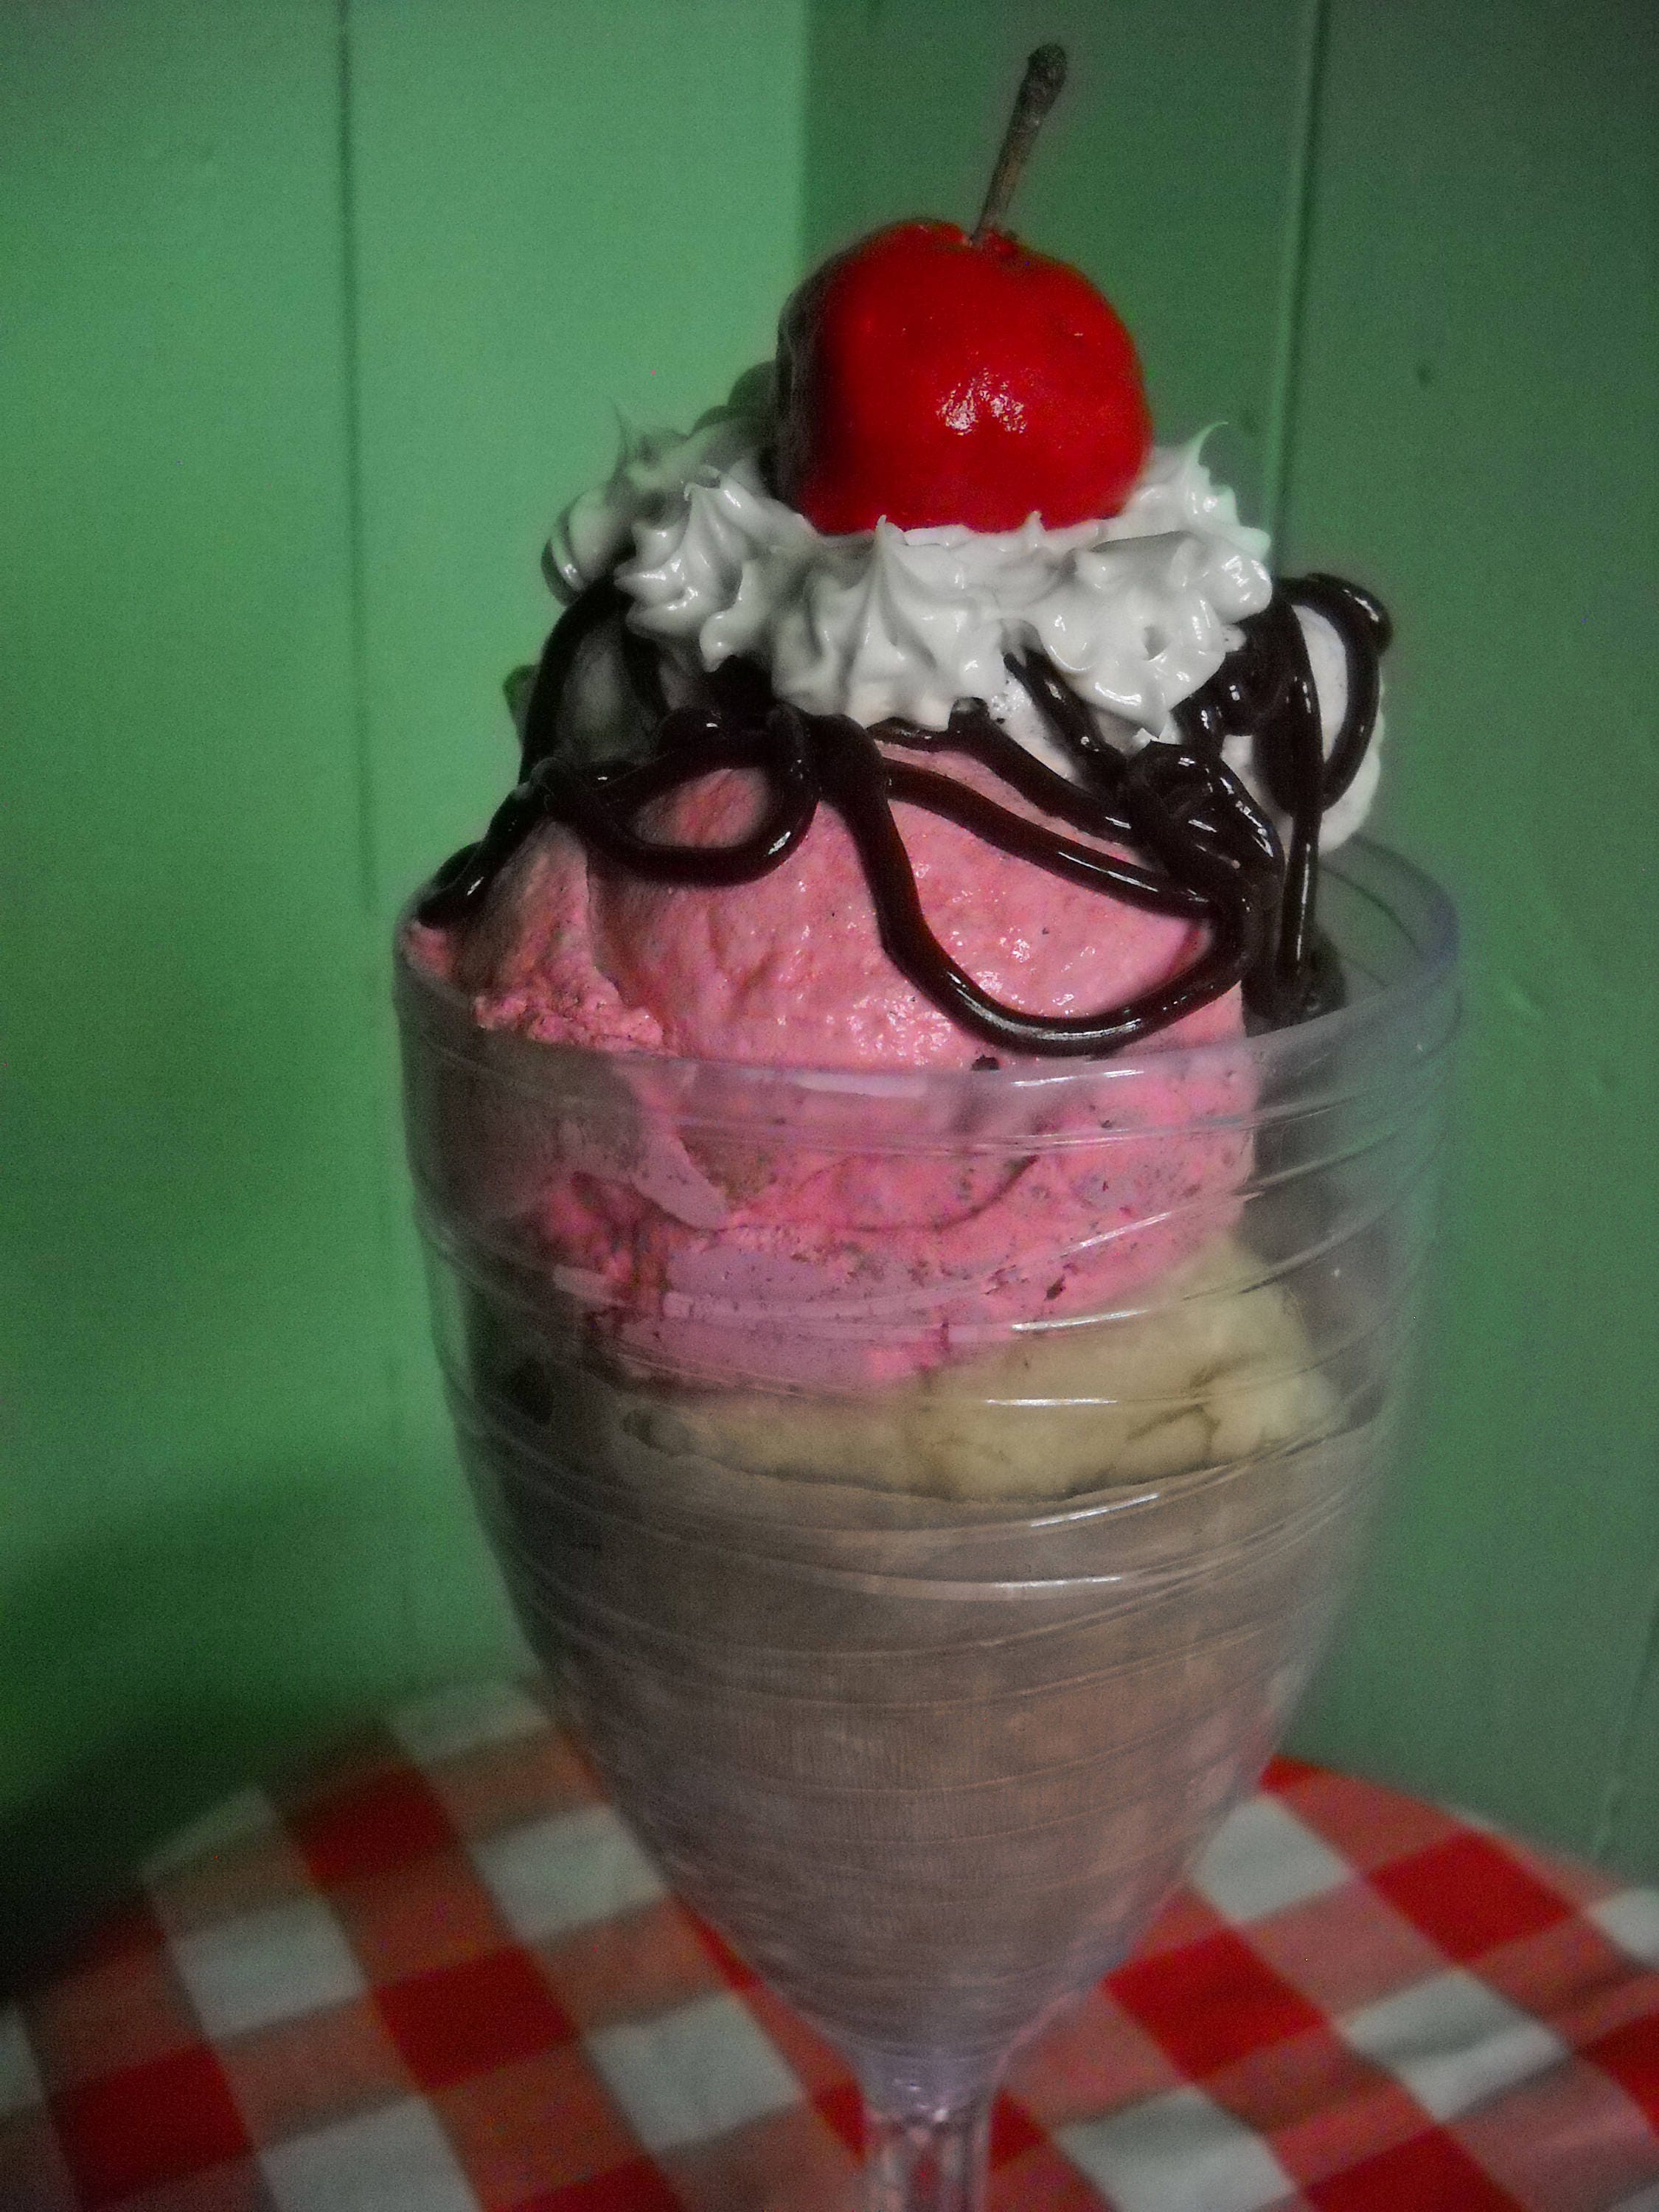 Fake Food Prop Fake Ice Cream Sundae With Syrup And Cherry 0155